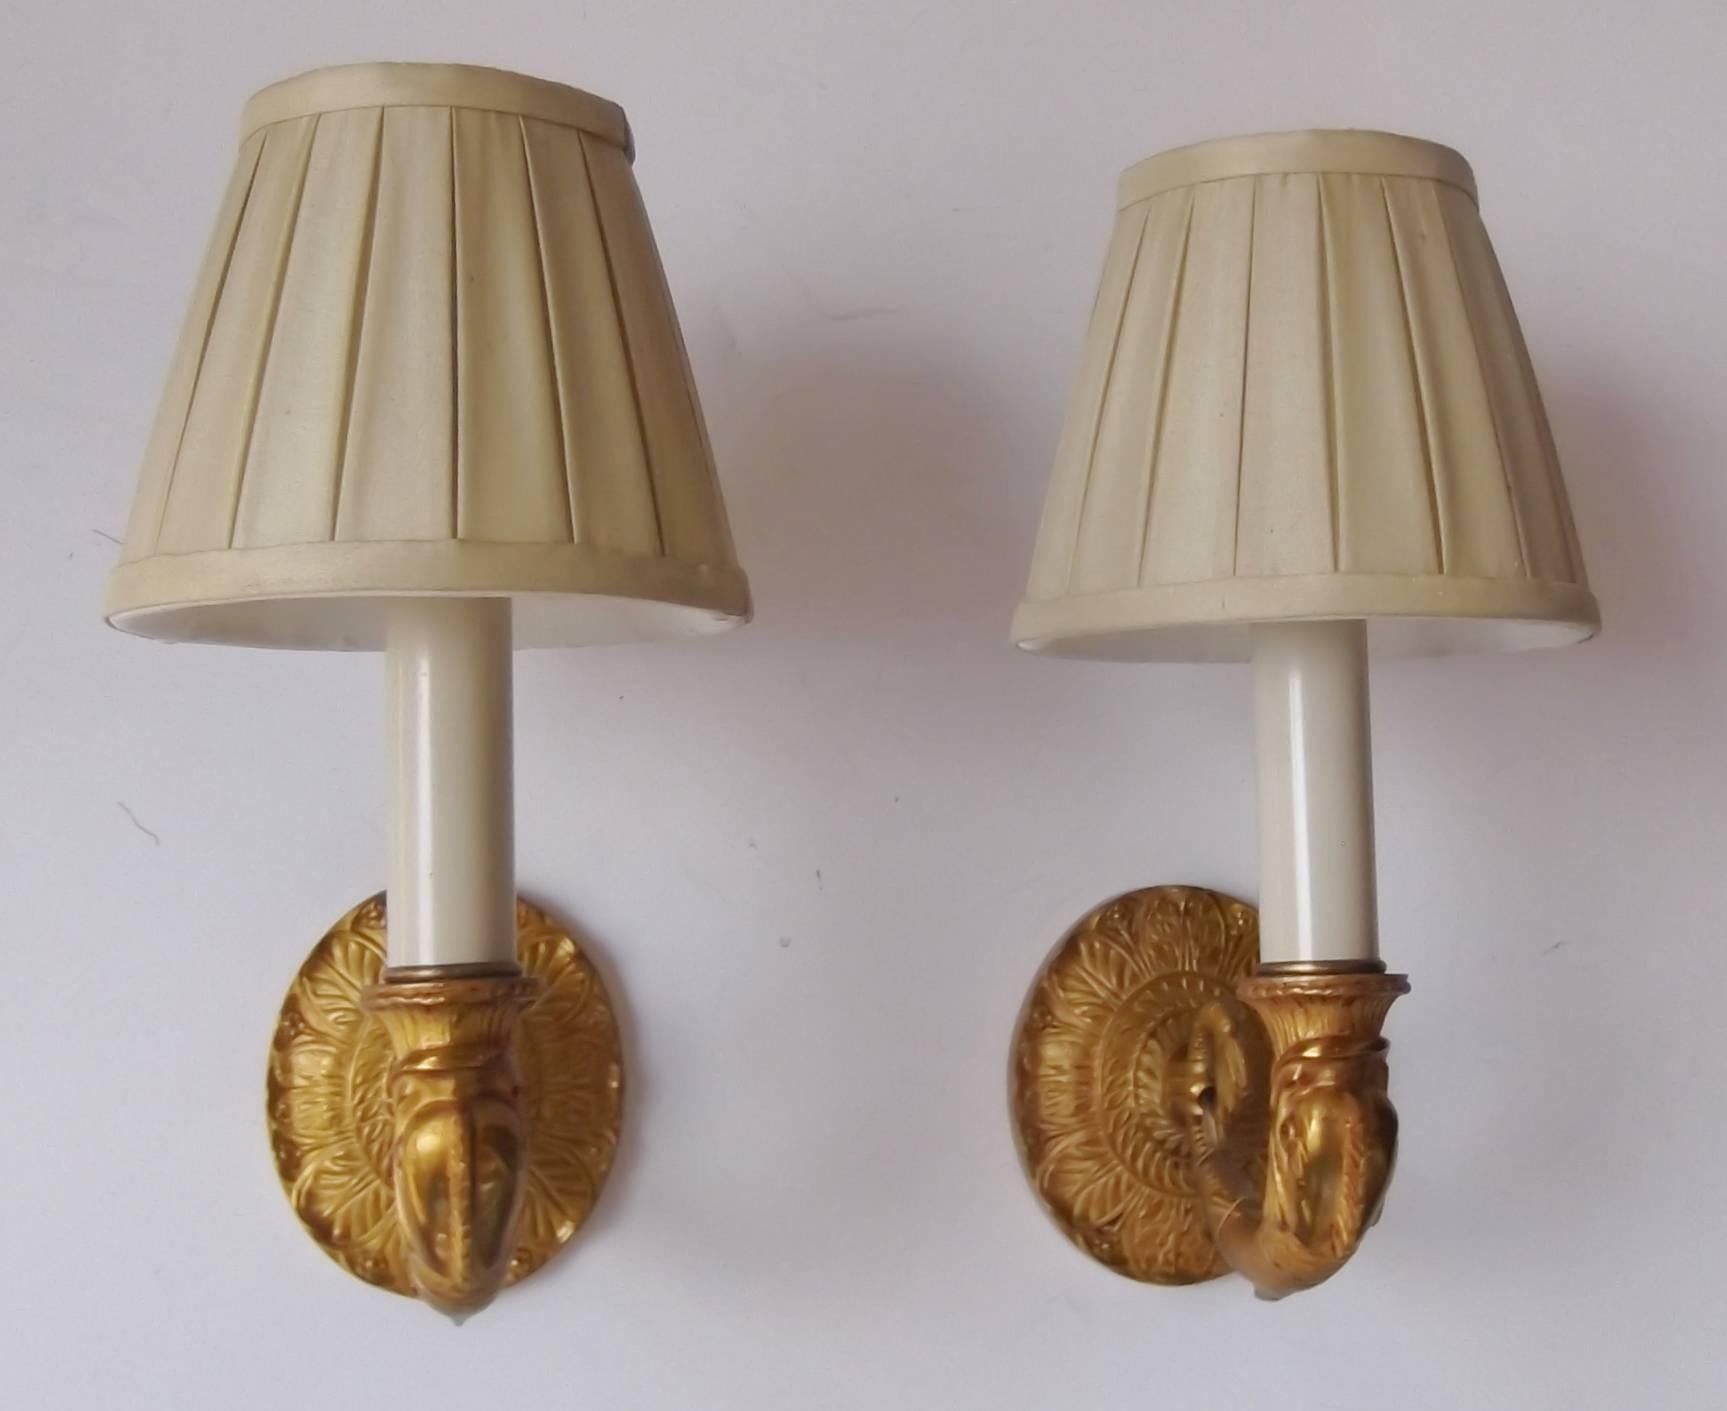 French Cast gilt bronze single light sconces.  Classic empire styling with a dolphin shaped arm supported by an oval back plate.  Recently rewired and ready to light.  These are the old style 